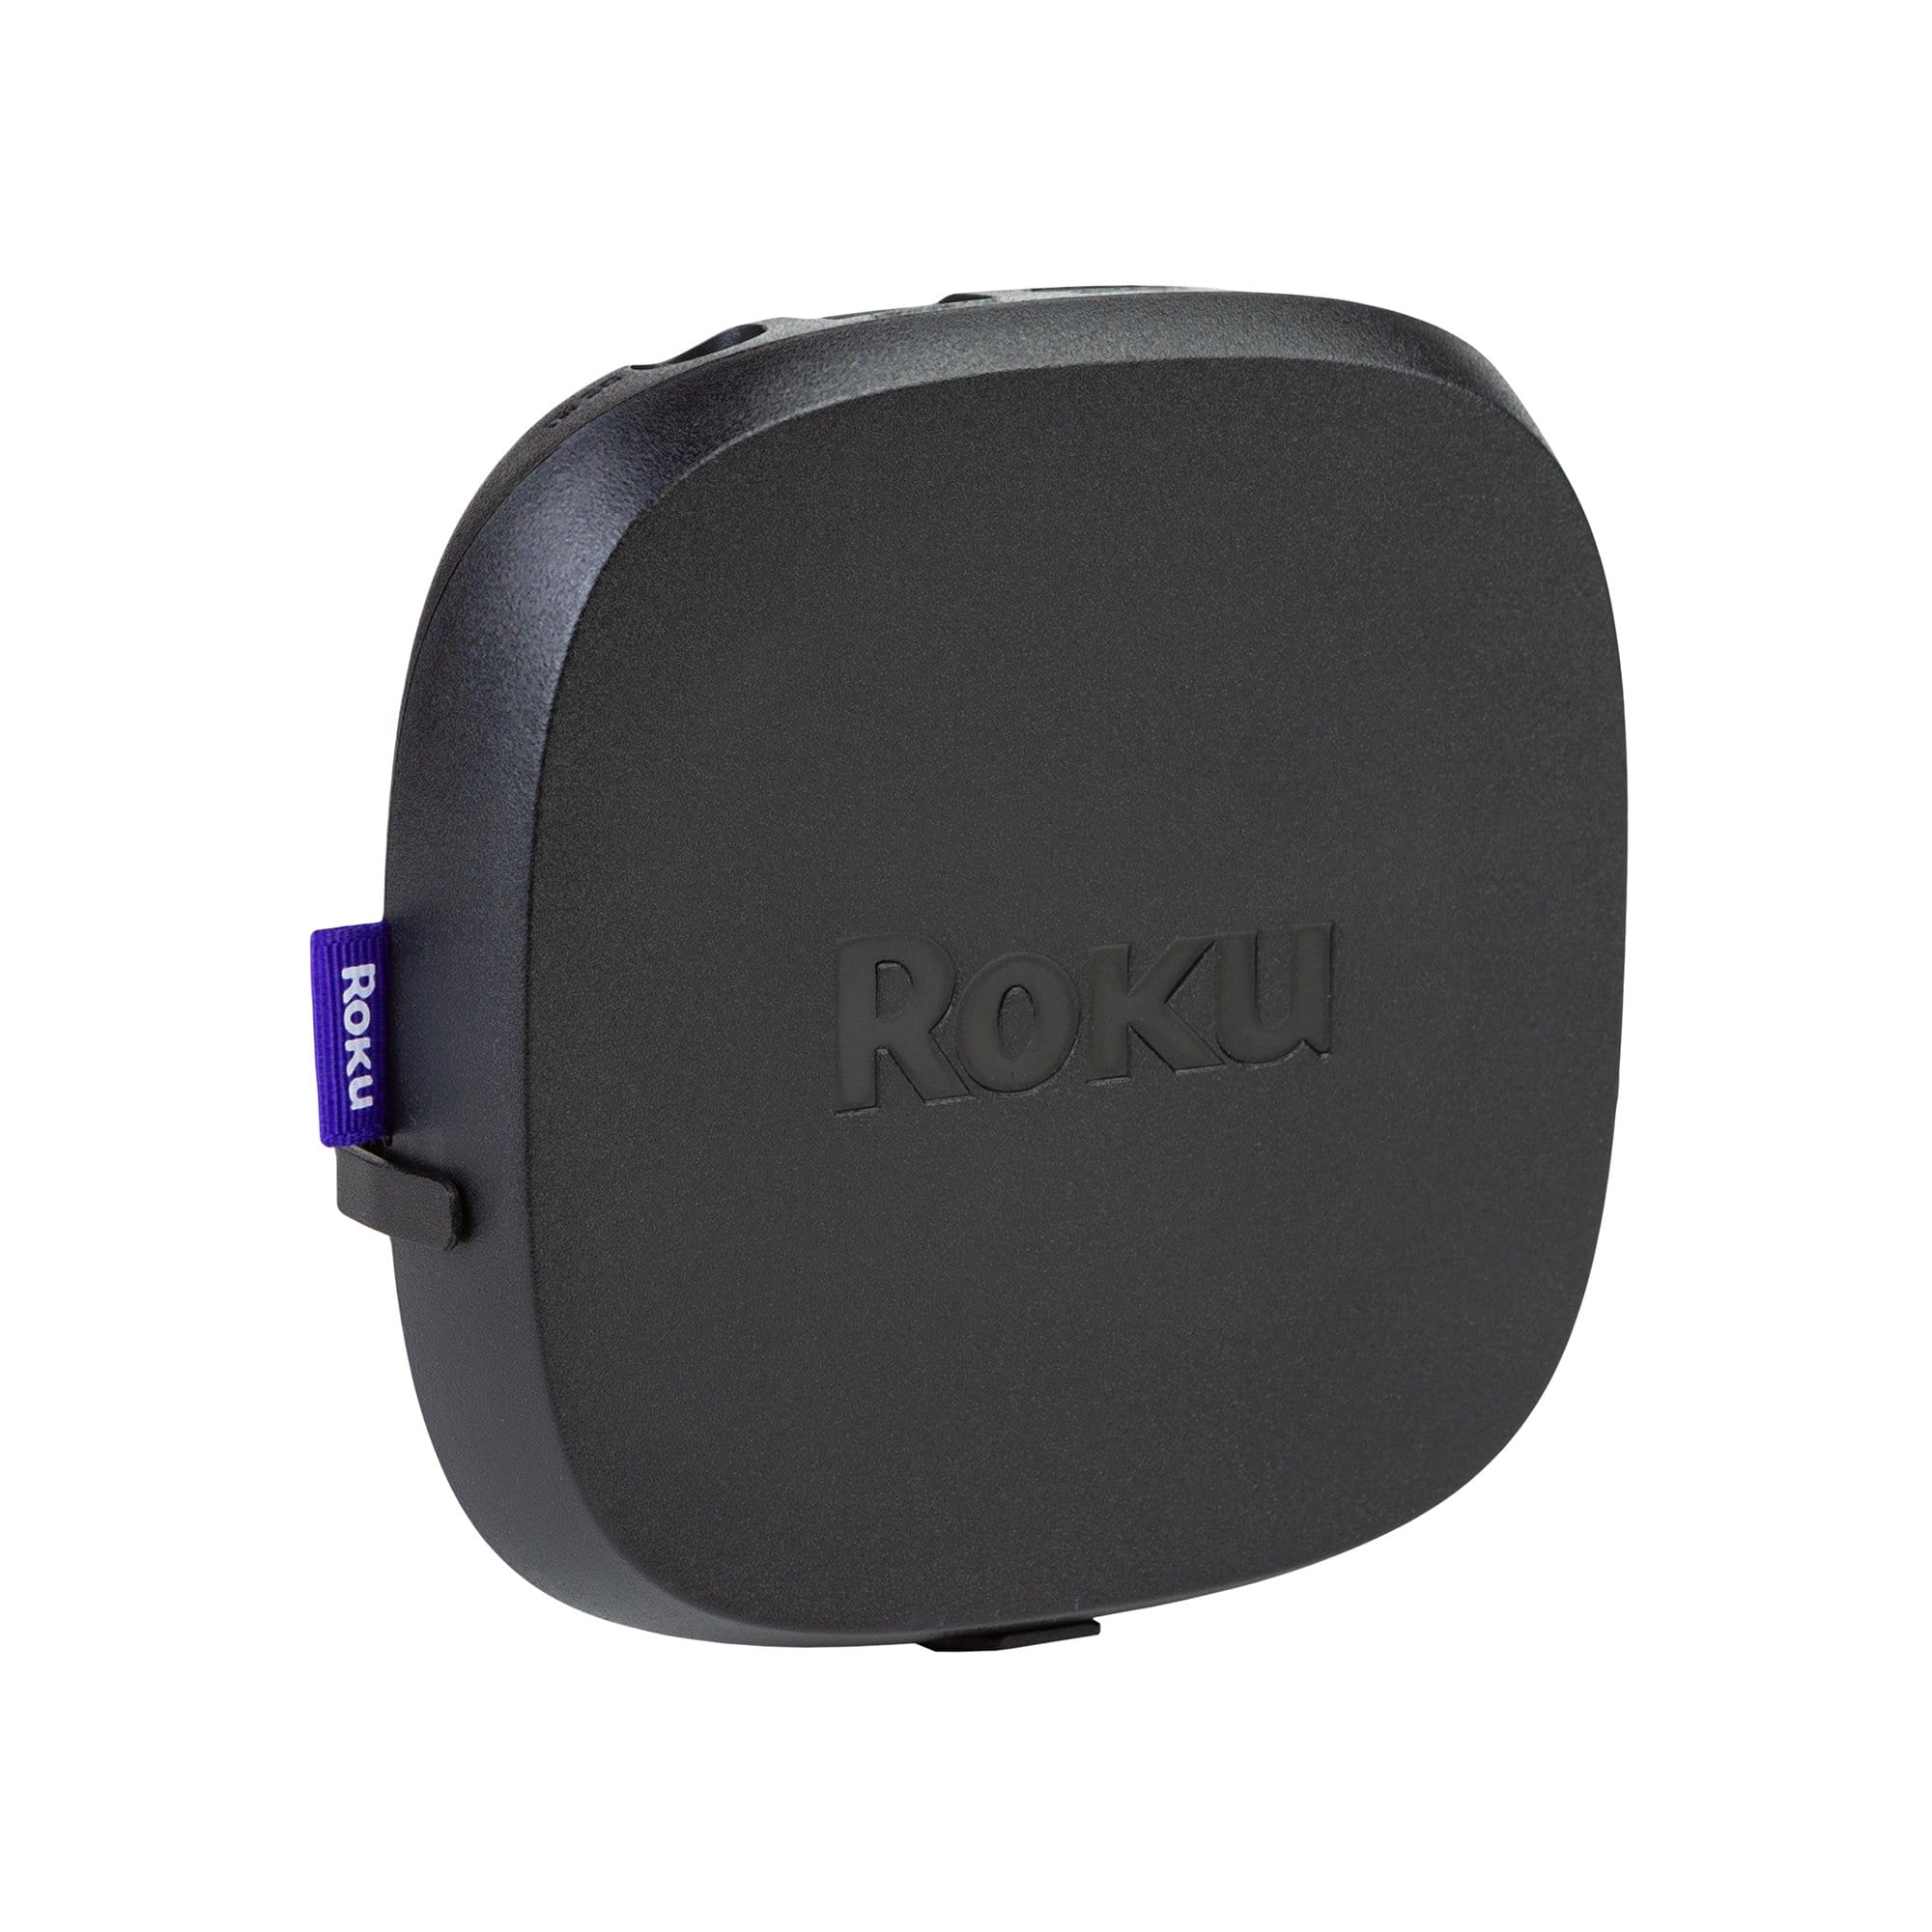 Roku Ultra 2020 shown securely mounted in the HIDEit R6 Roku Ulta Mount for the 2020 model.